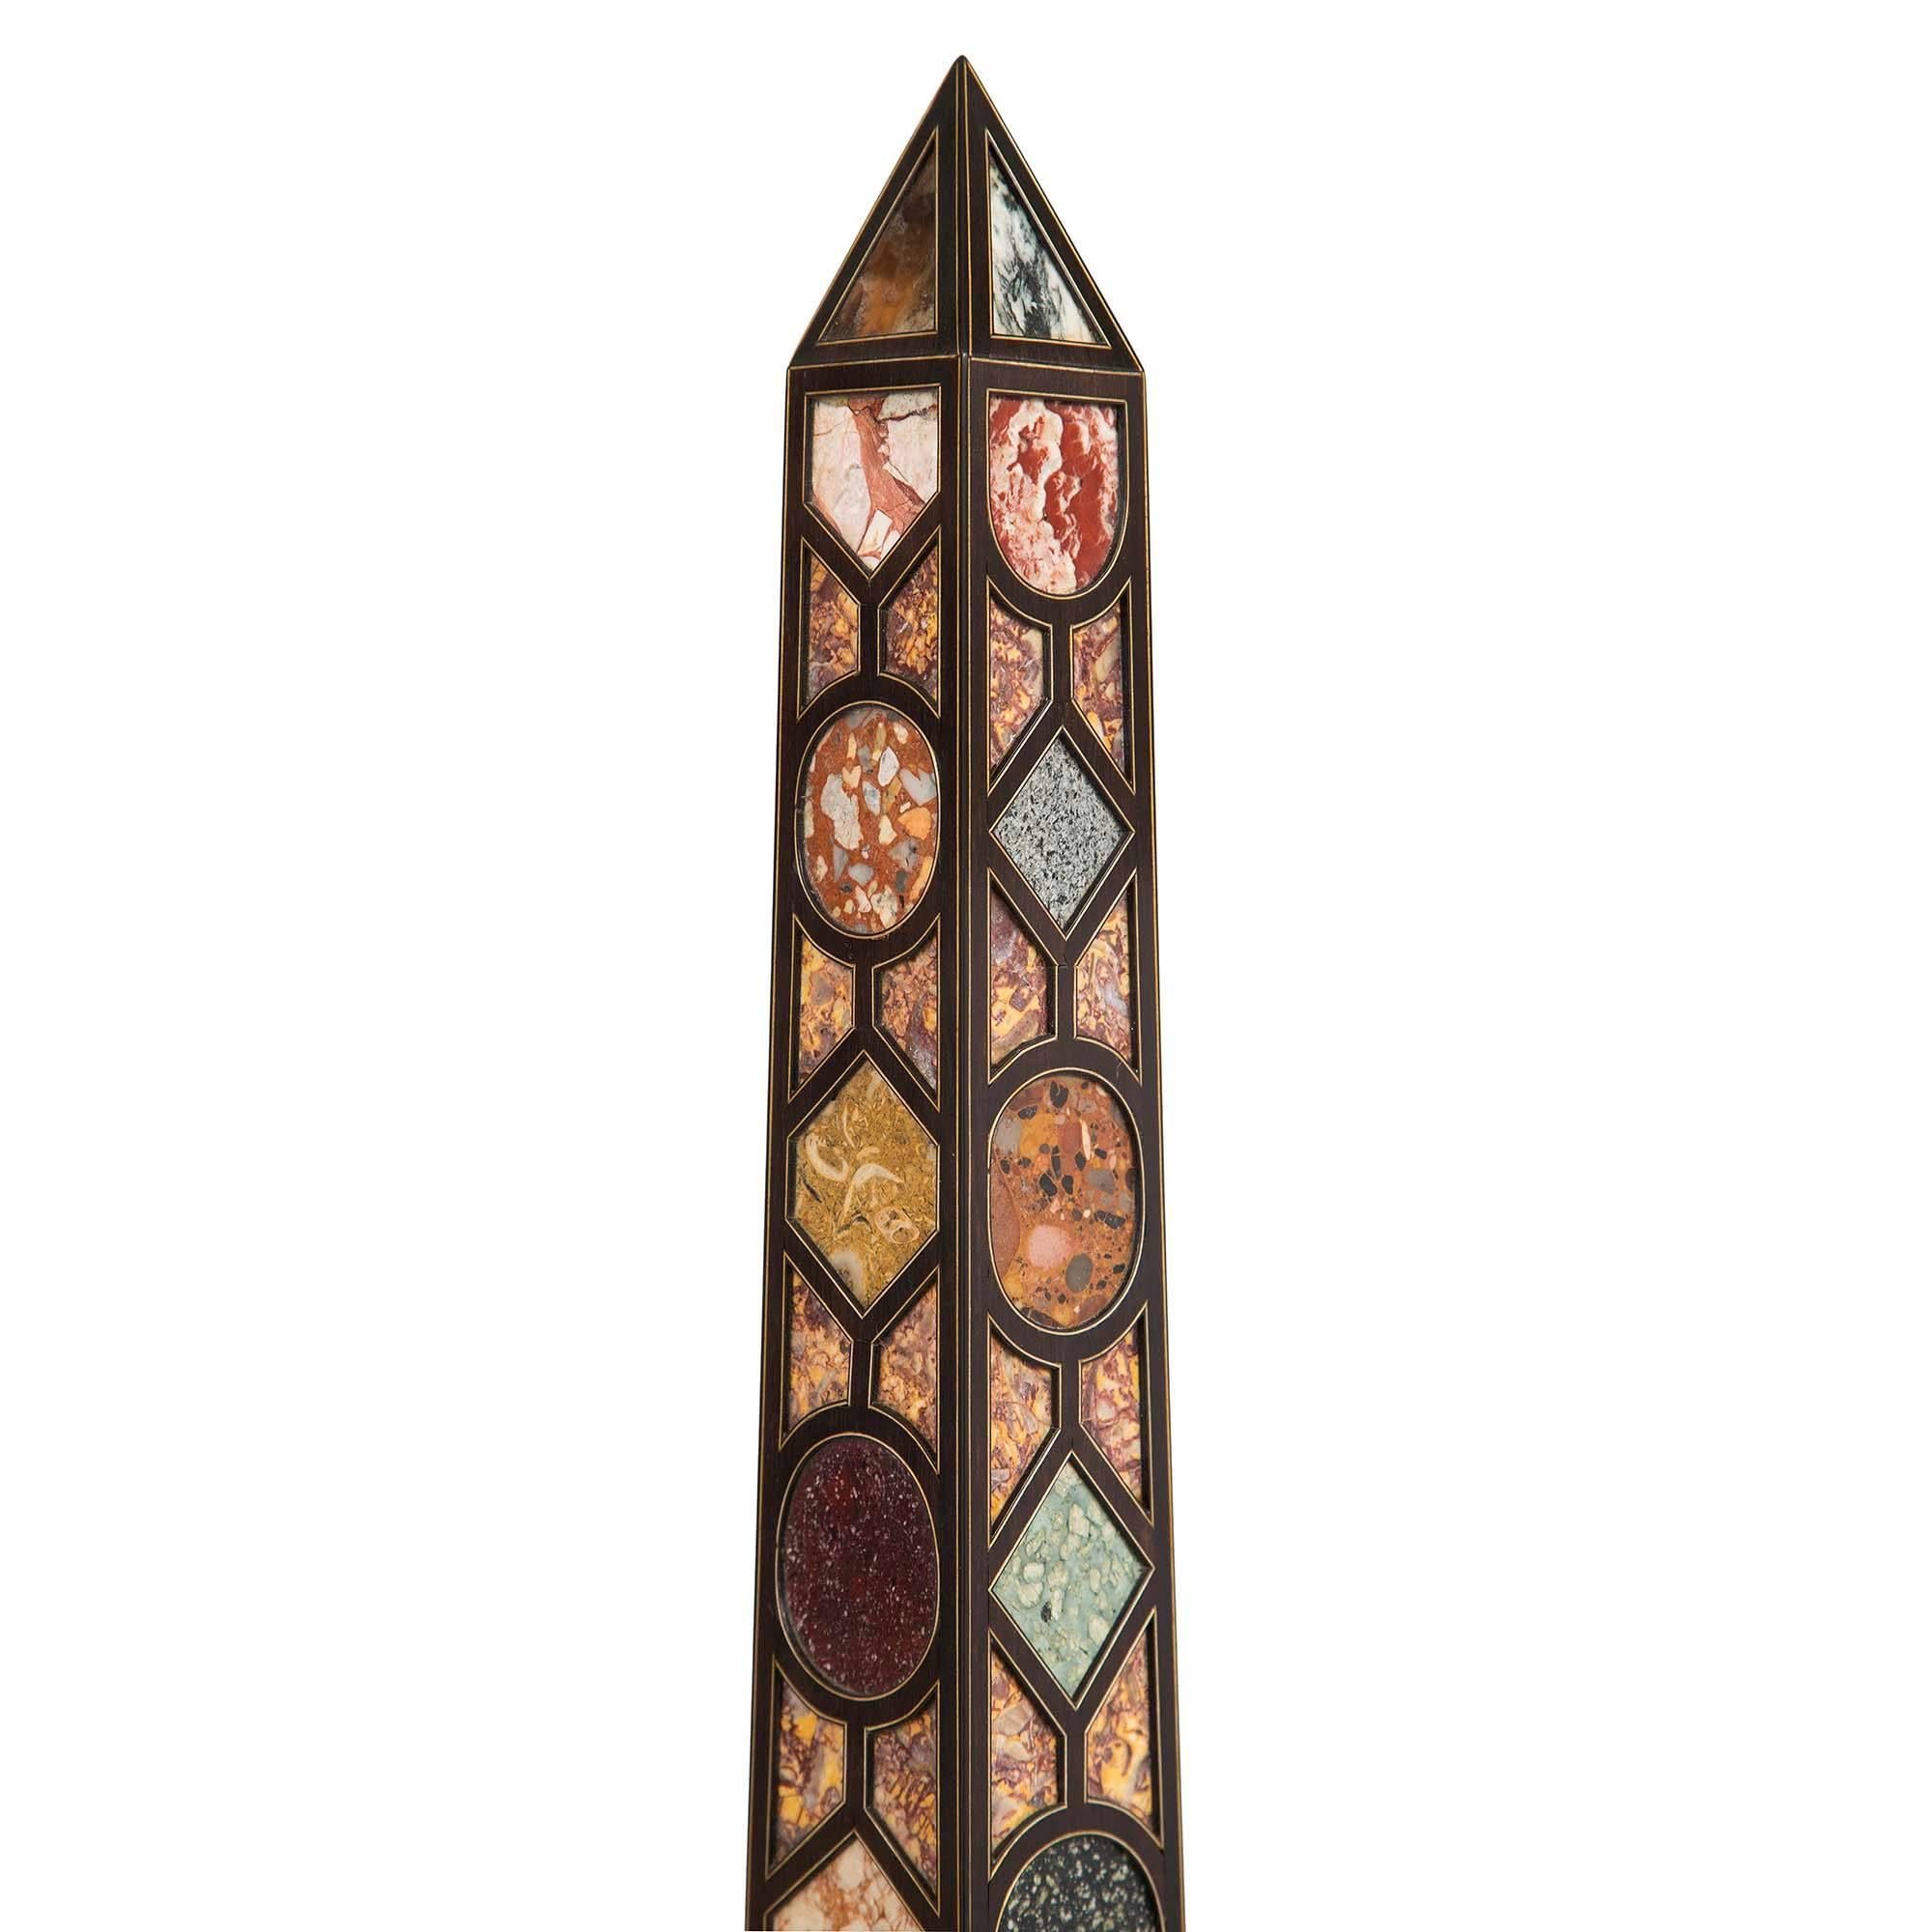 A stunning and large-scale pair of French 19th century Napoleon III period ebonized fruitwood and pietra dura inlaid obelisks. Each obelisk is raised by a square base with a mottled border below striking diamond-shaped and triangular inlaid